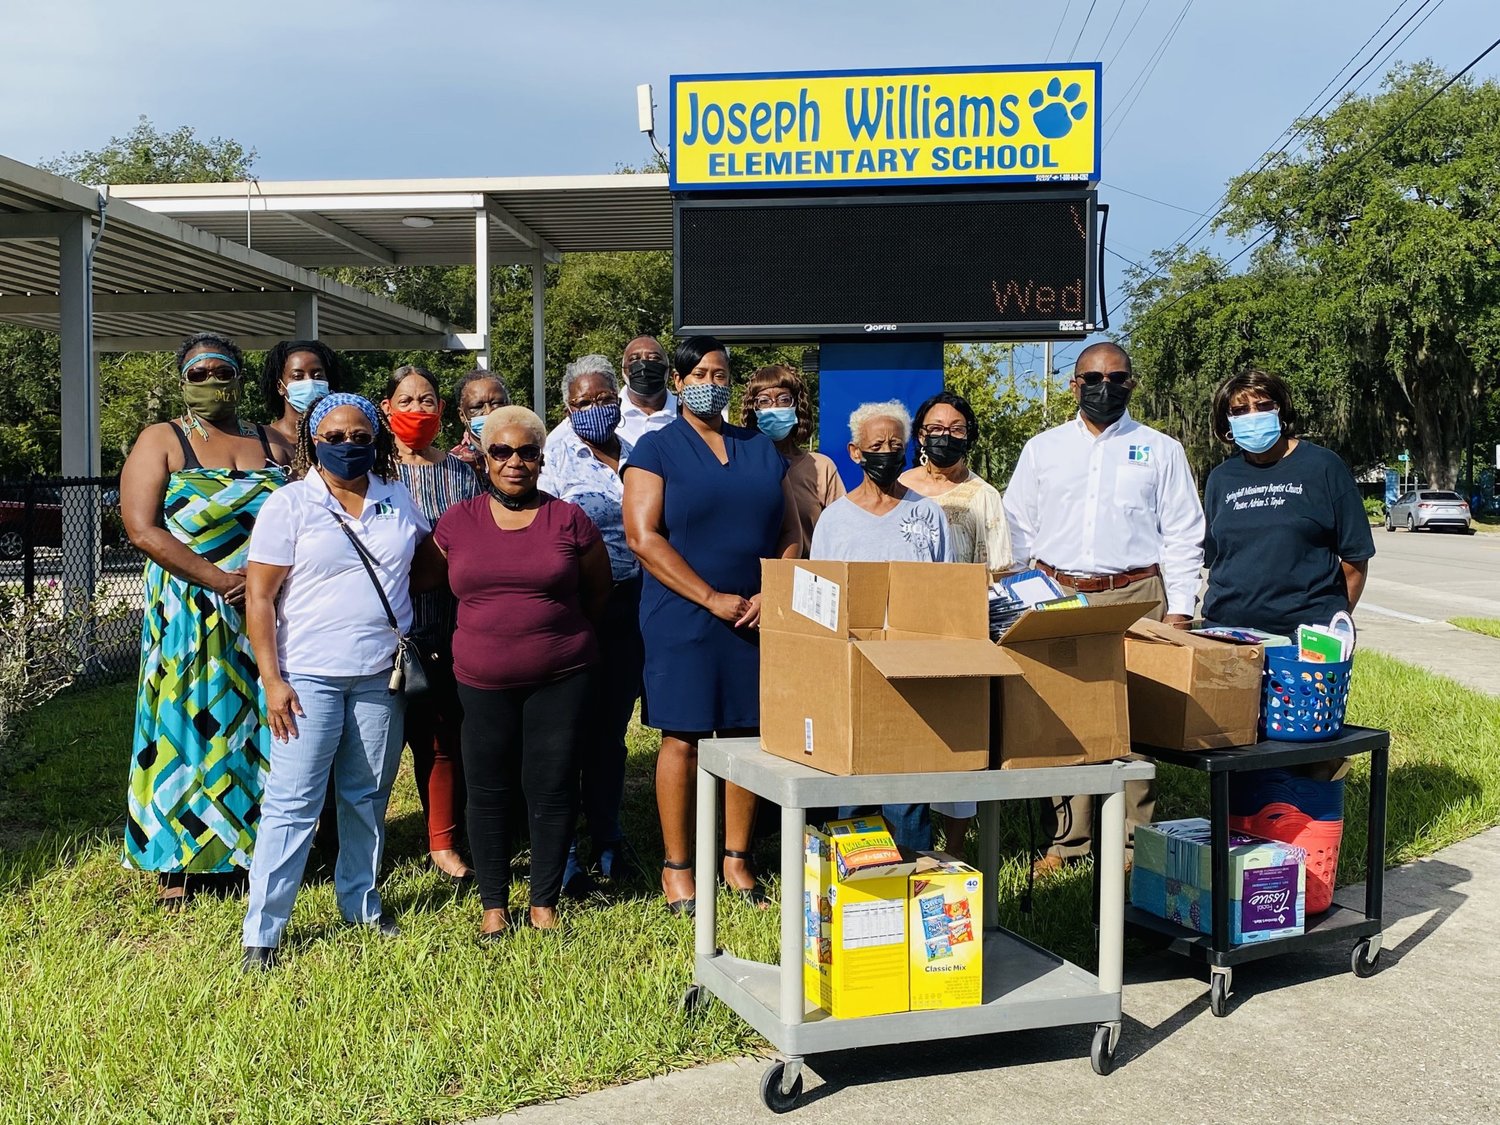 Members of Springhill Missionary Baptist Church in Gainesville, Fla., attend a community outreach event. As part of its outward focus, the church united to serve its community through its “The Church Has Left the Building” initiative.